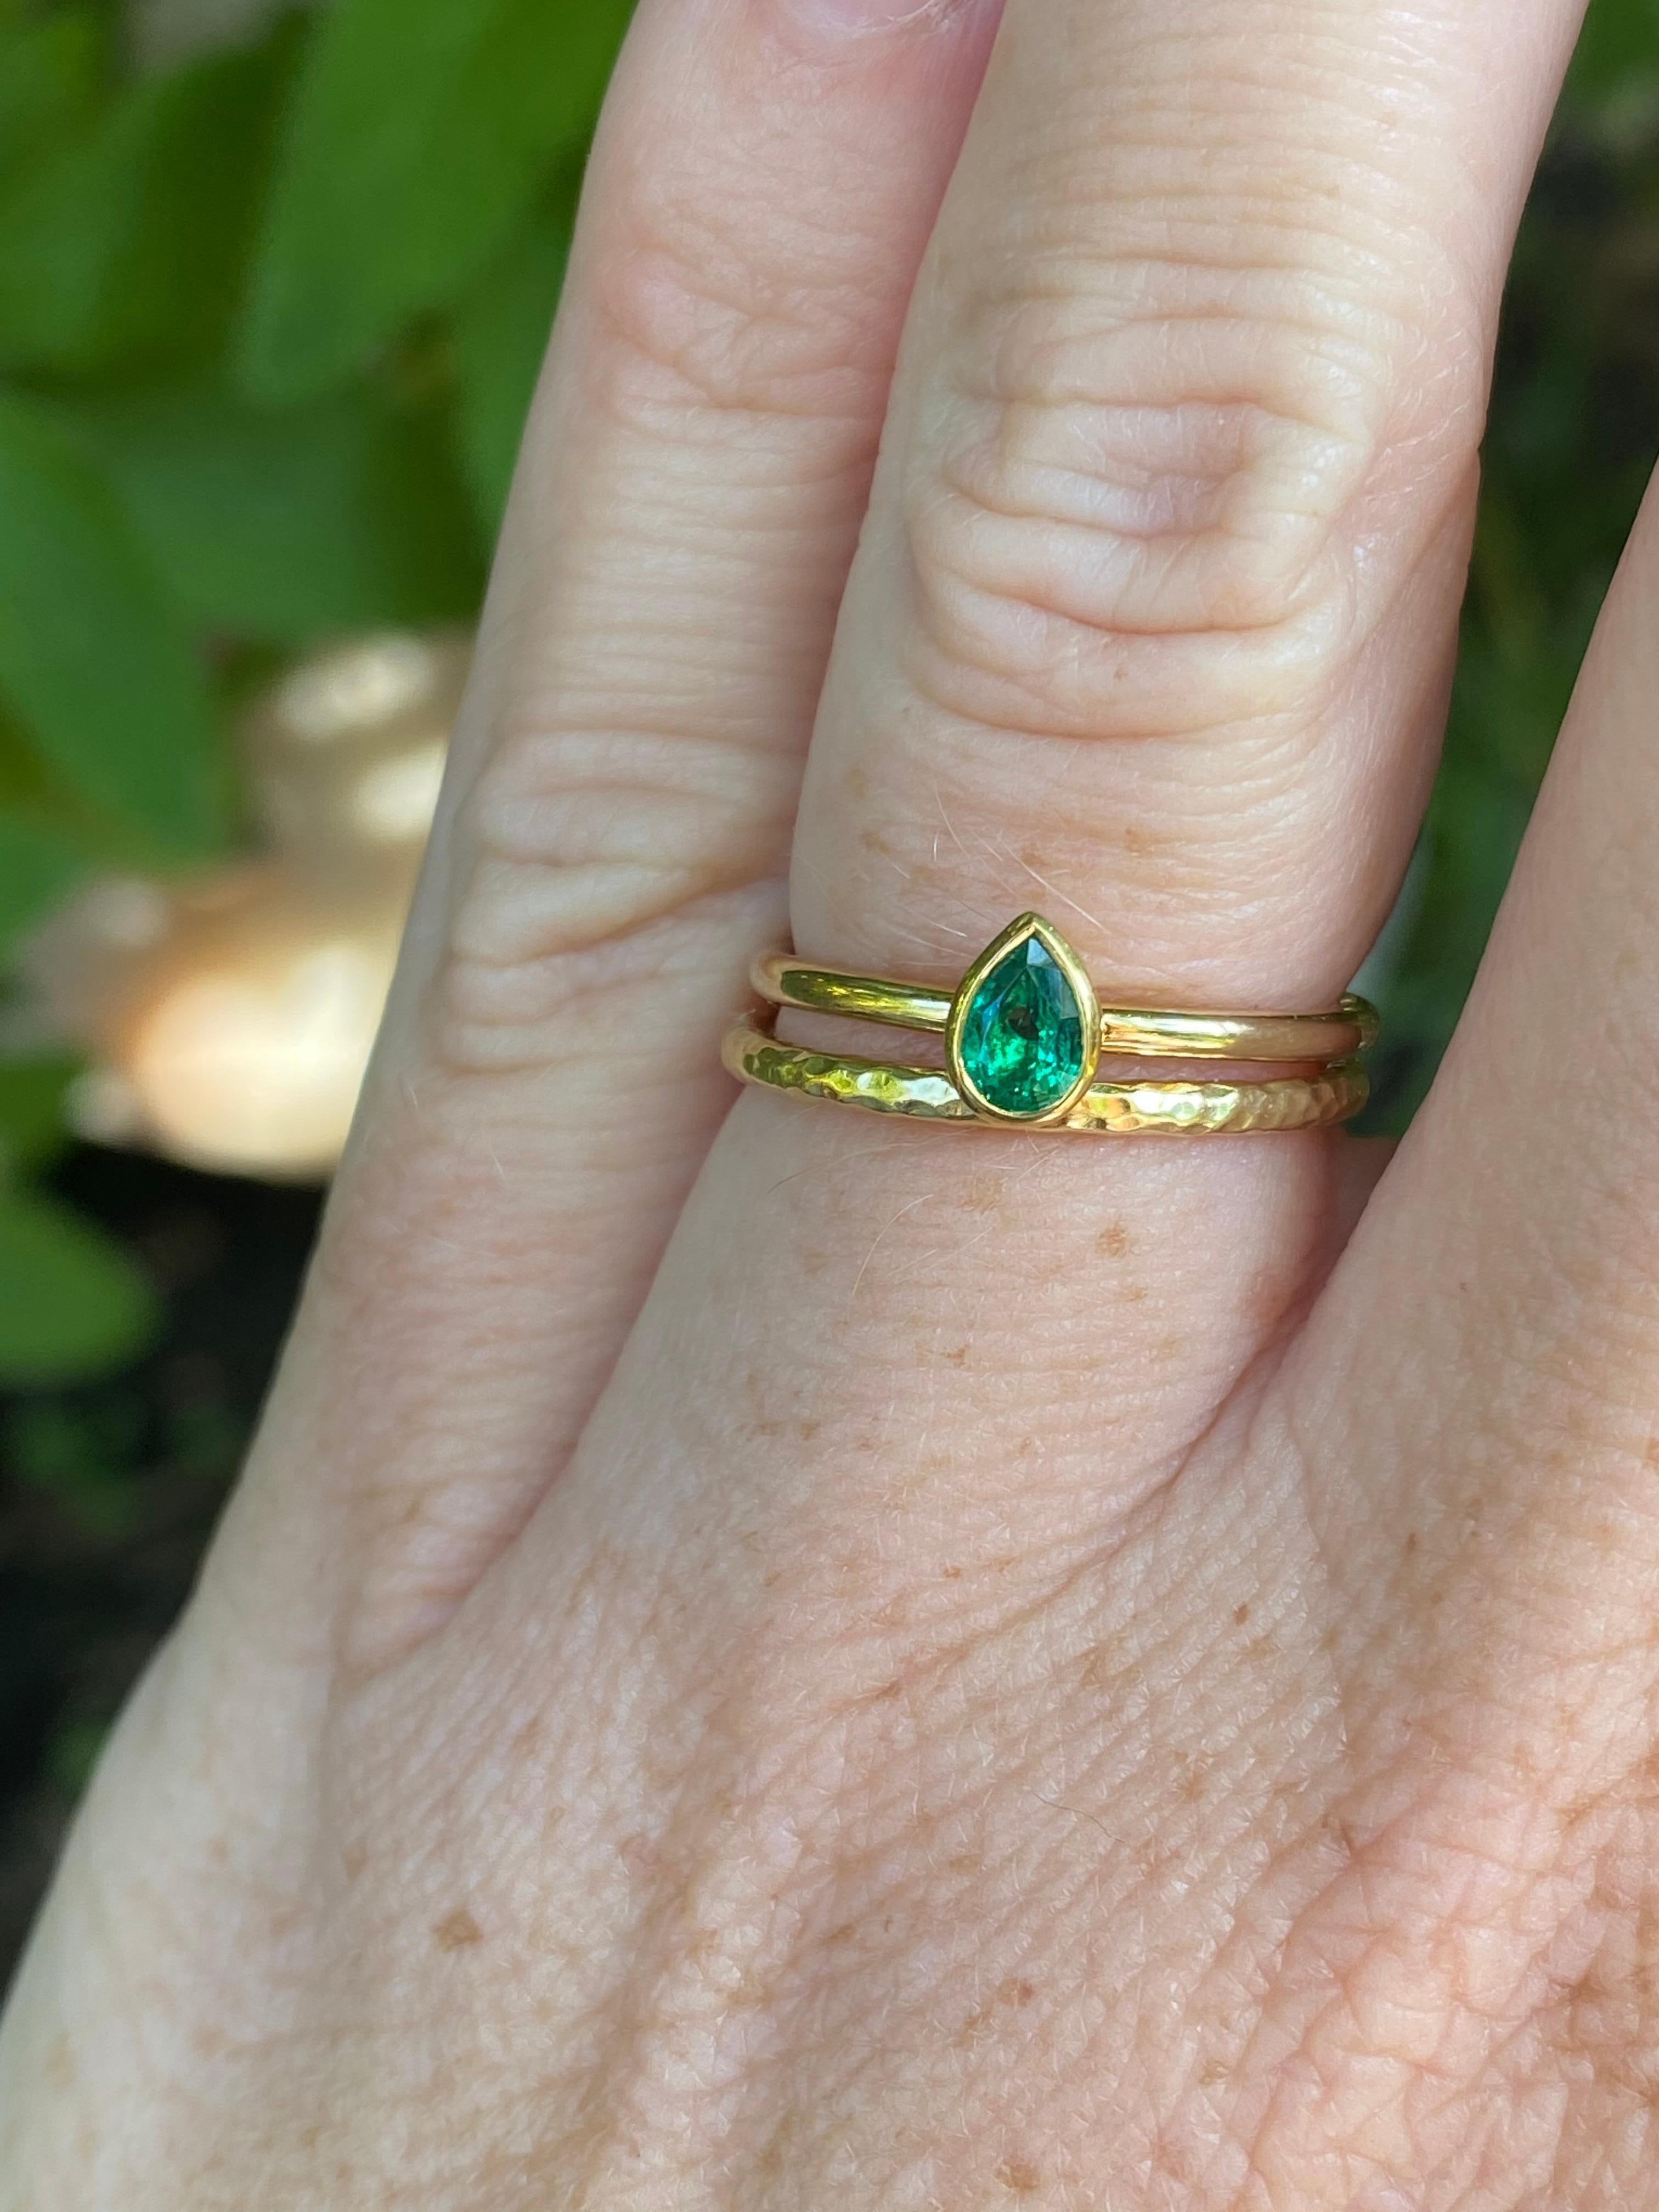 Round Cut Pear Shaped Colombian Emerald 18 Karat Gold Stacking Engagement Ring For Sale